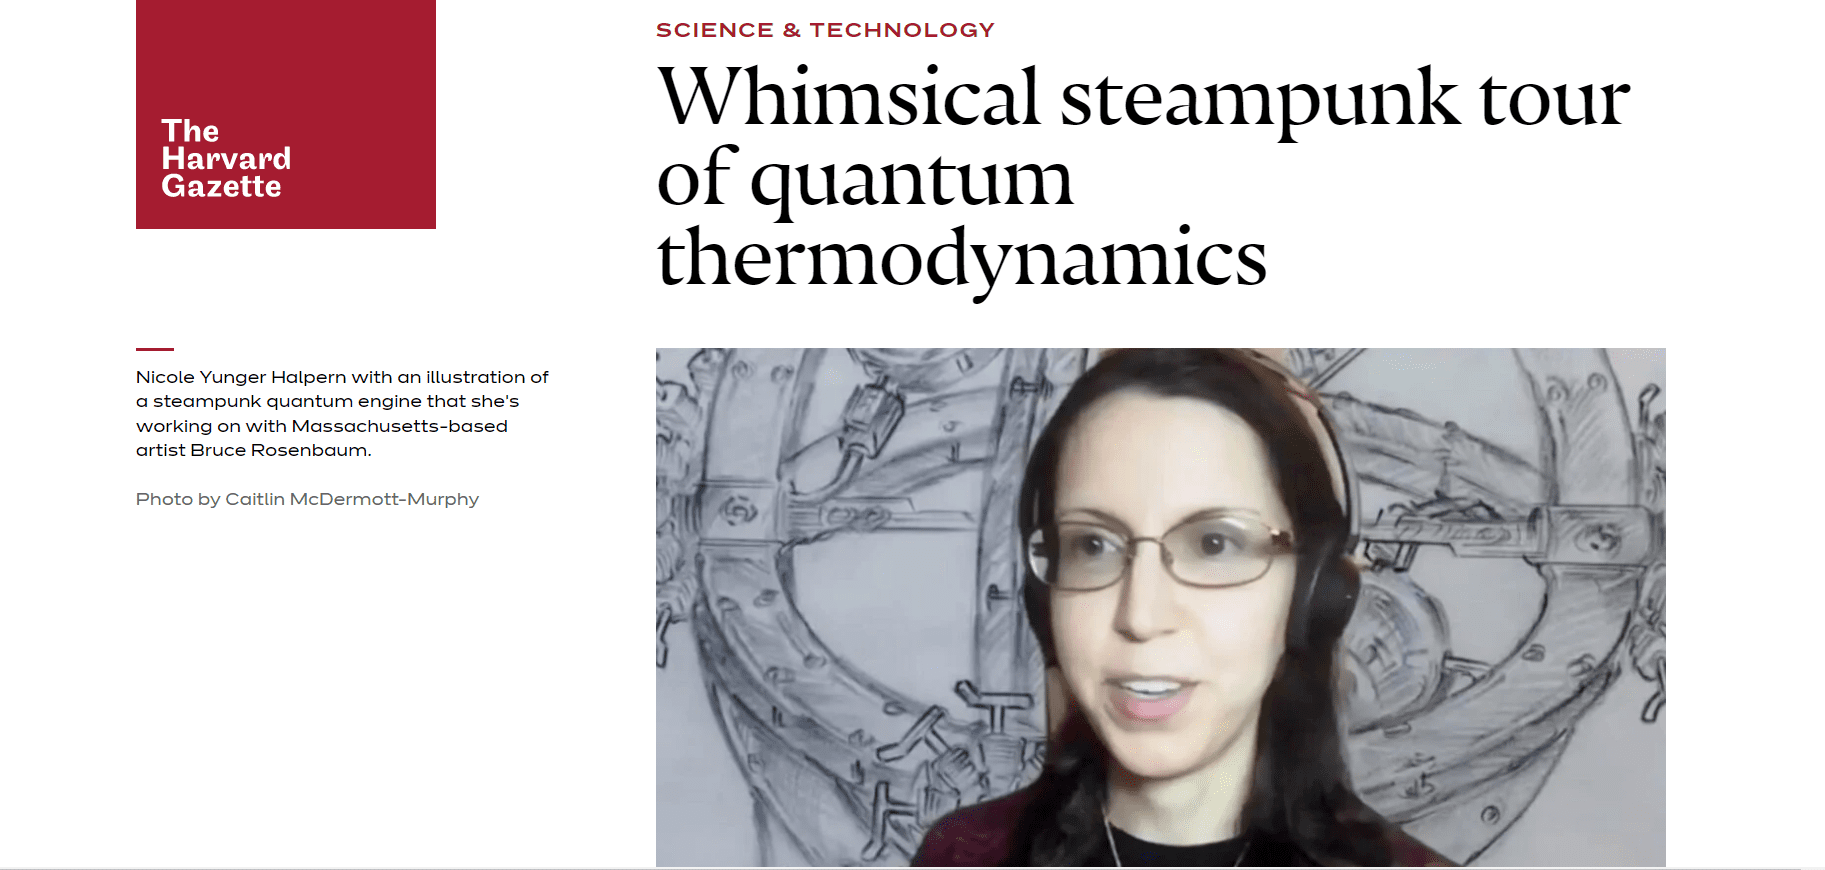 Featured image for “Whimsical steampunk tour of quantum thermodynamics”